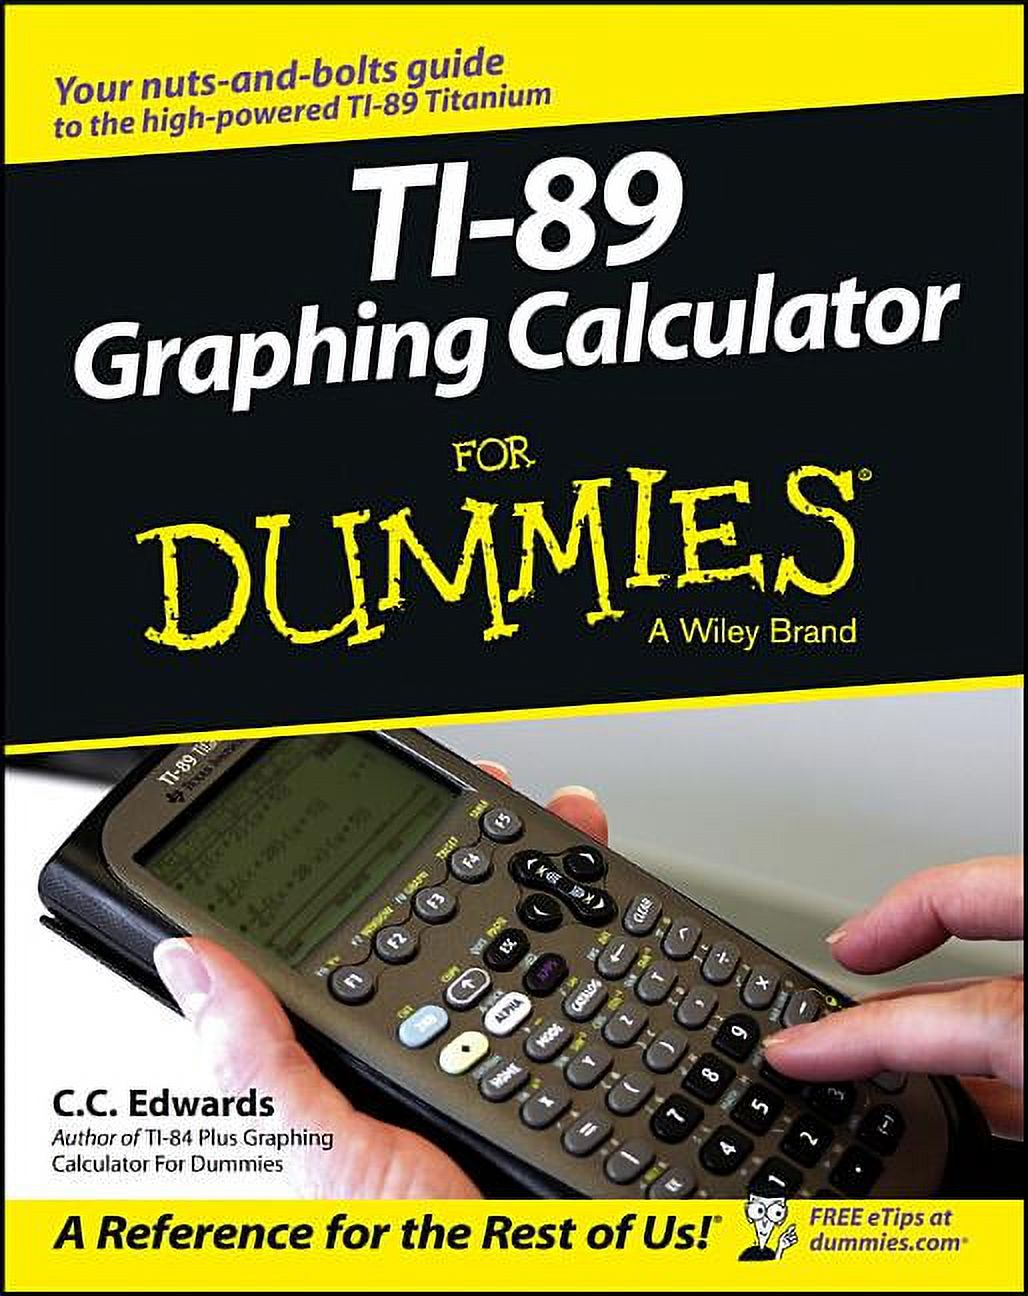 For Dummies: TI-89 Graphing Calculator For Dummies (Paperback) - image 1 of 1